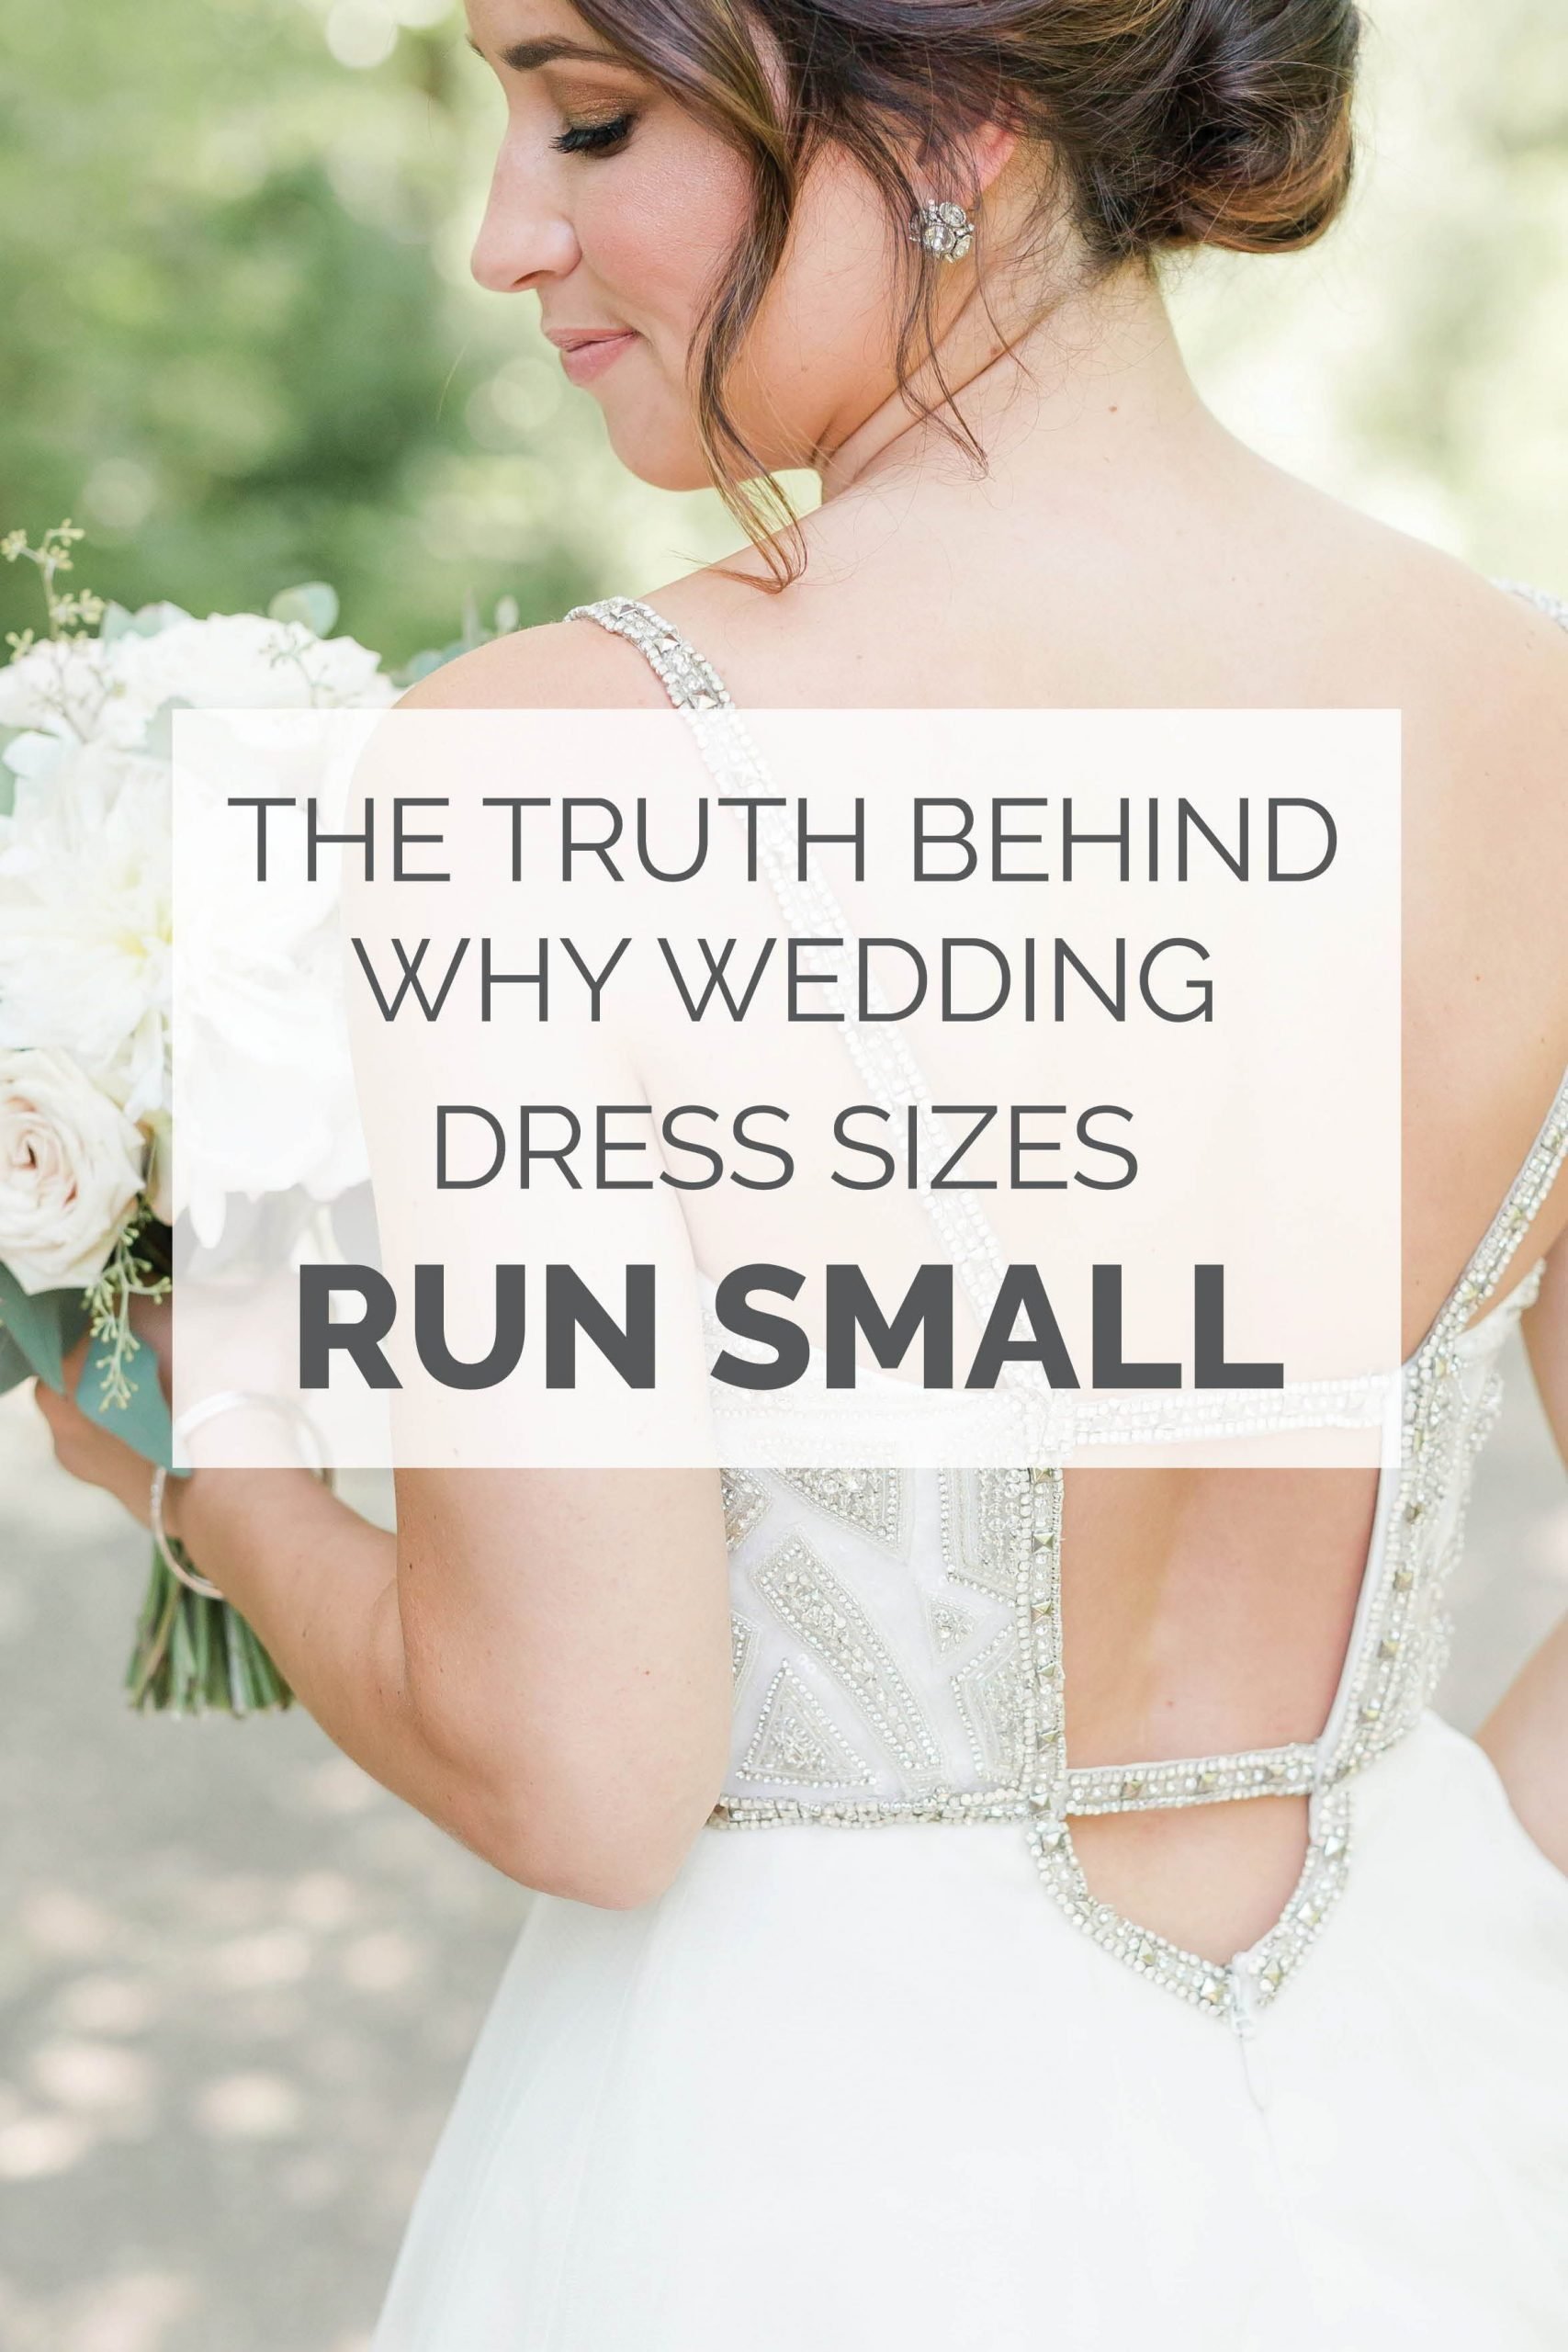 The Truth Behind Why Wedding Dress Sizes Run Small